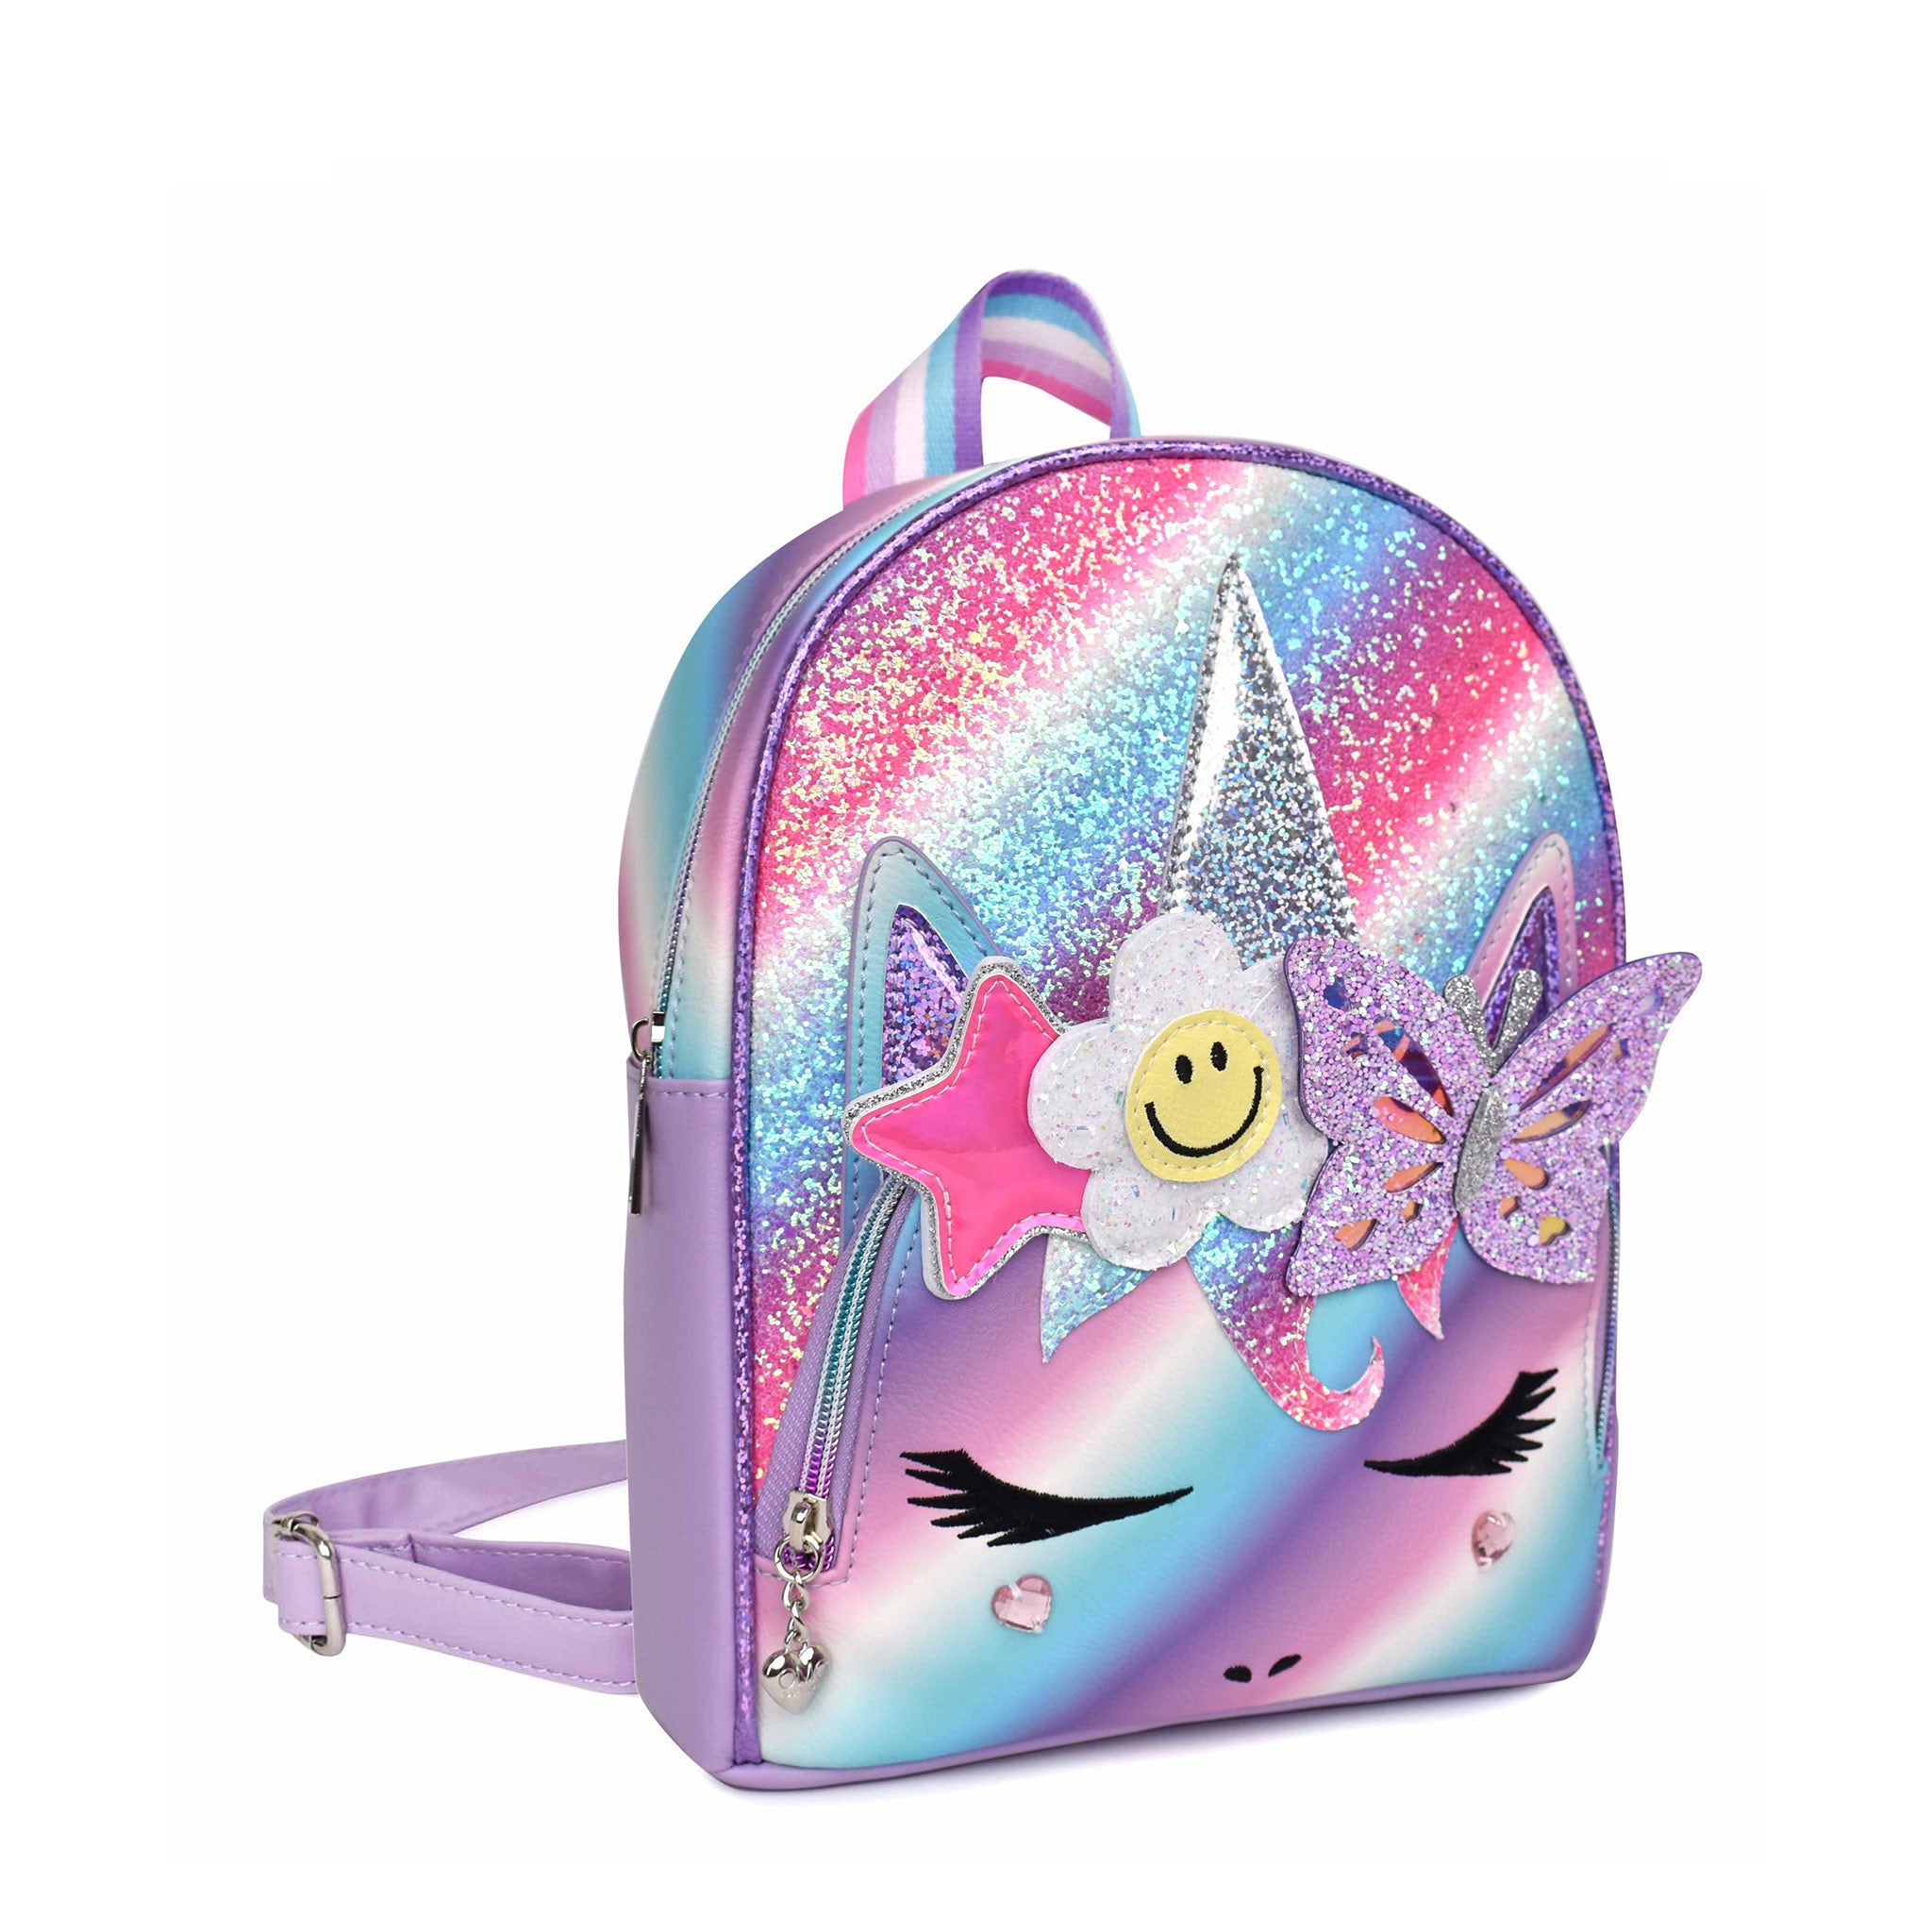 Side view of glitter striped unicorn face mini backpack with daisy, star, and butterfly appliques.